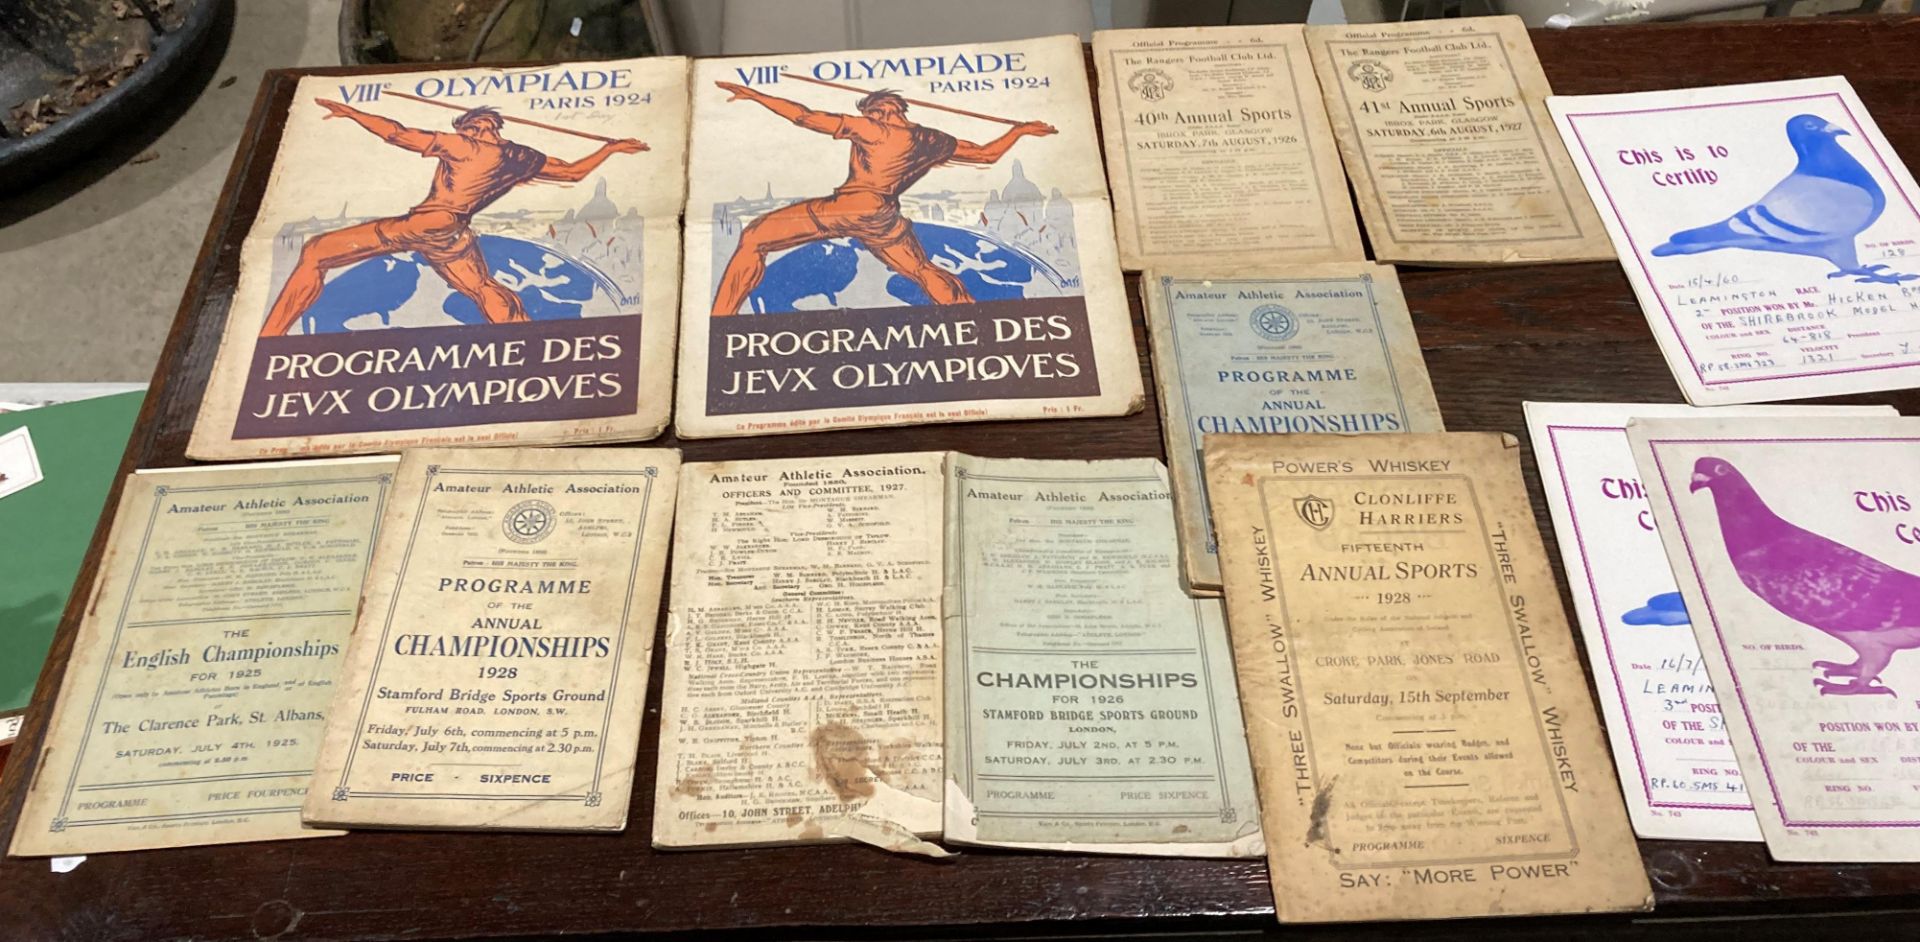 Two programmes for the VIII Olympide Paris 1924,